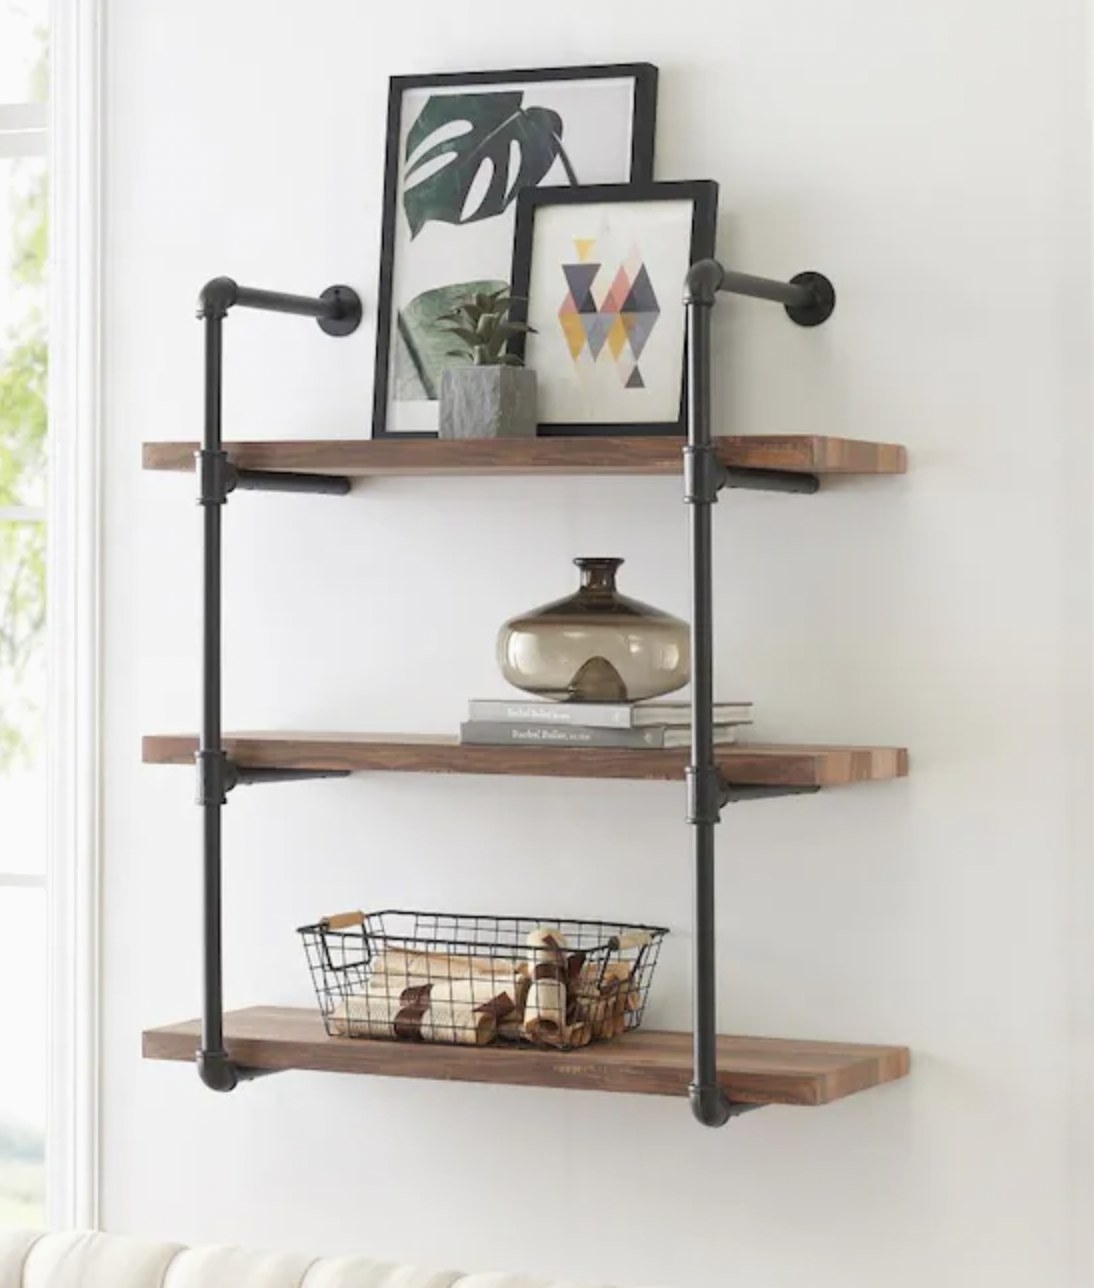 a wood and metal shelving unit with two metal rods and three wooden shelves